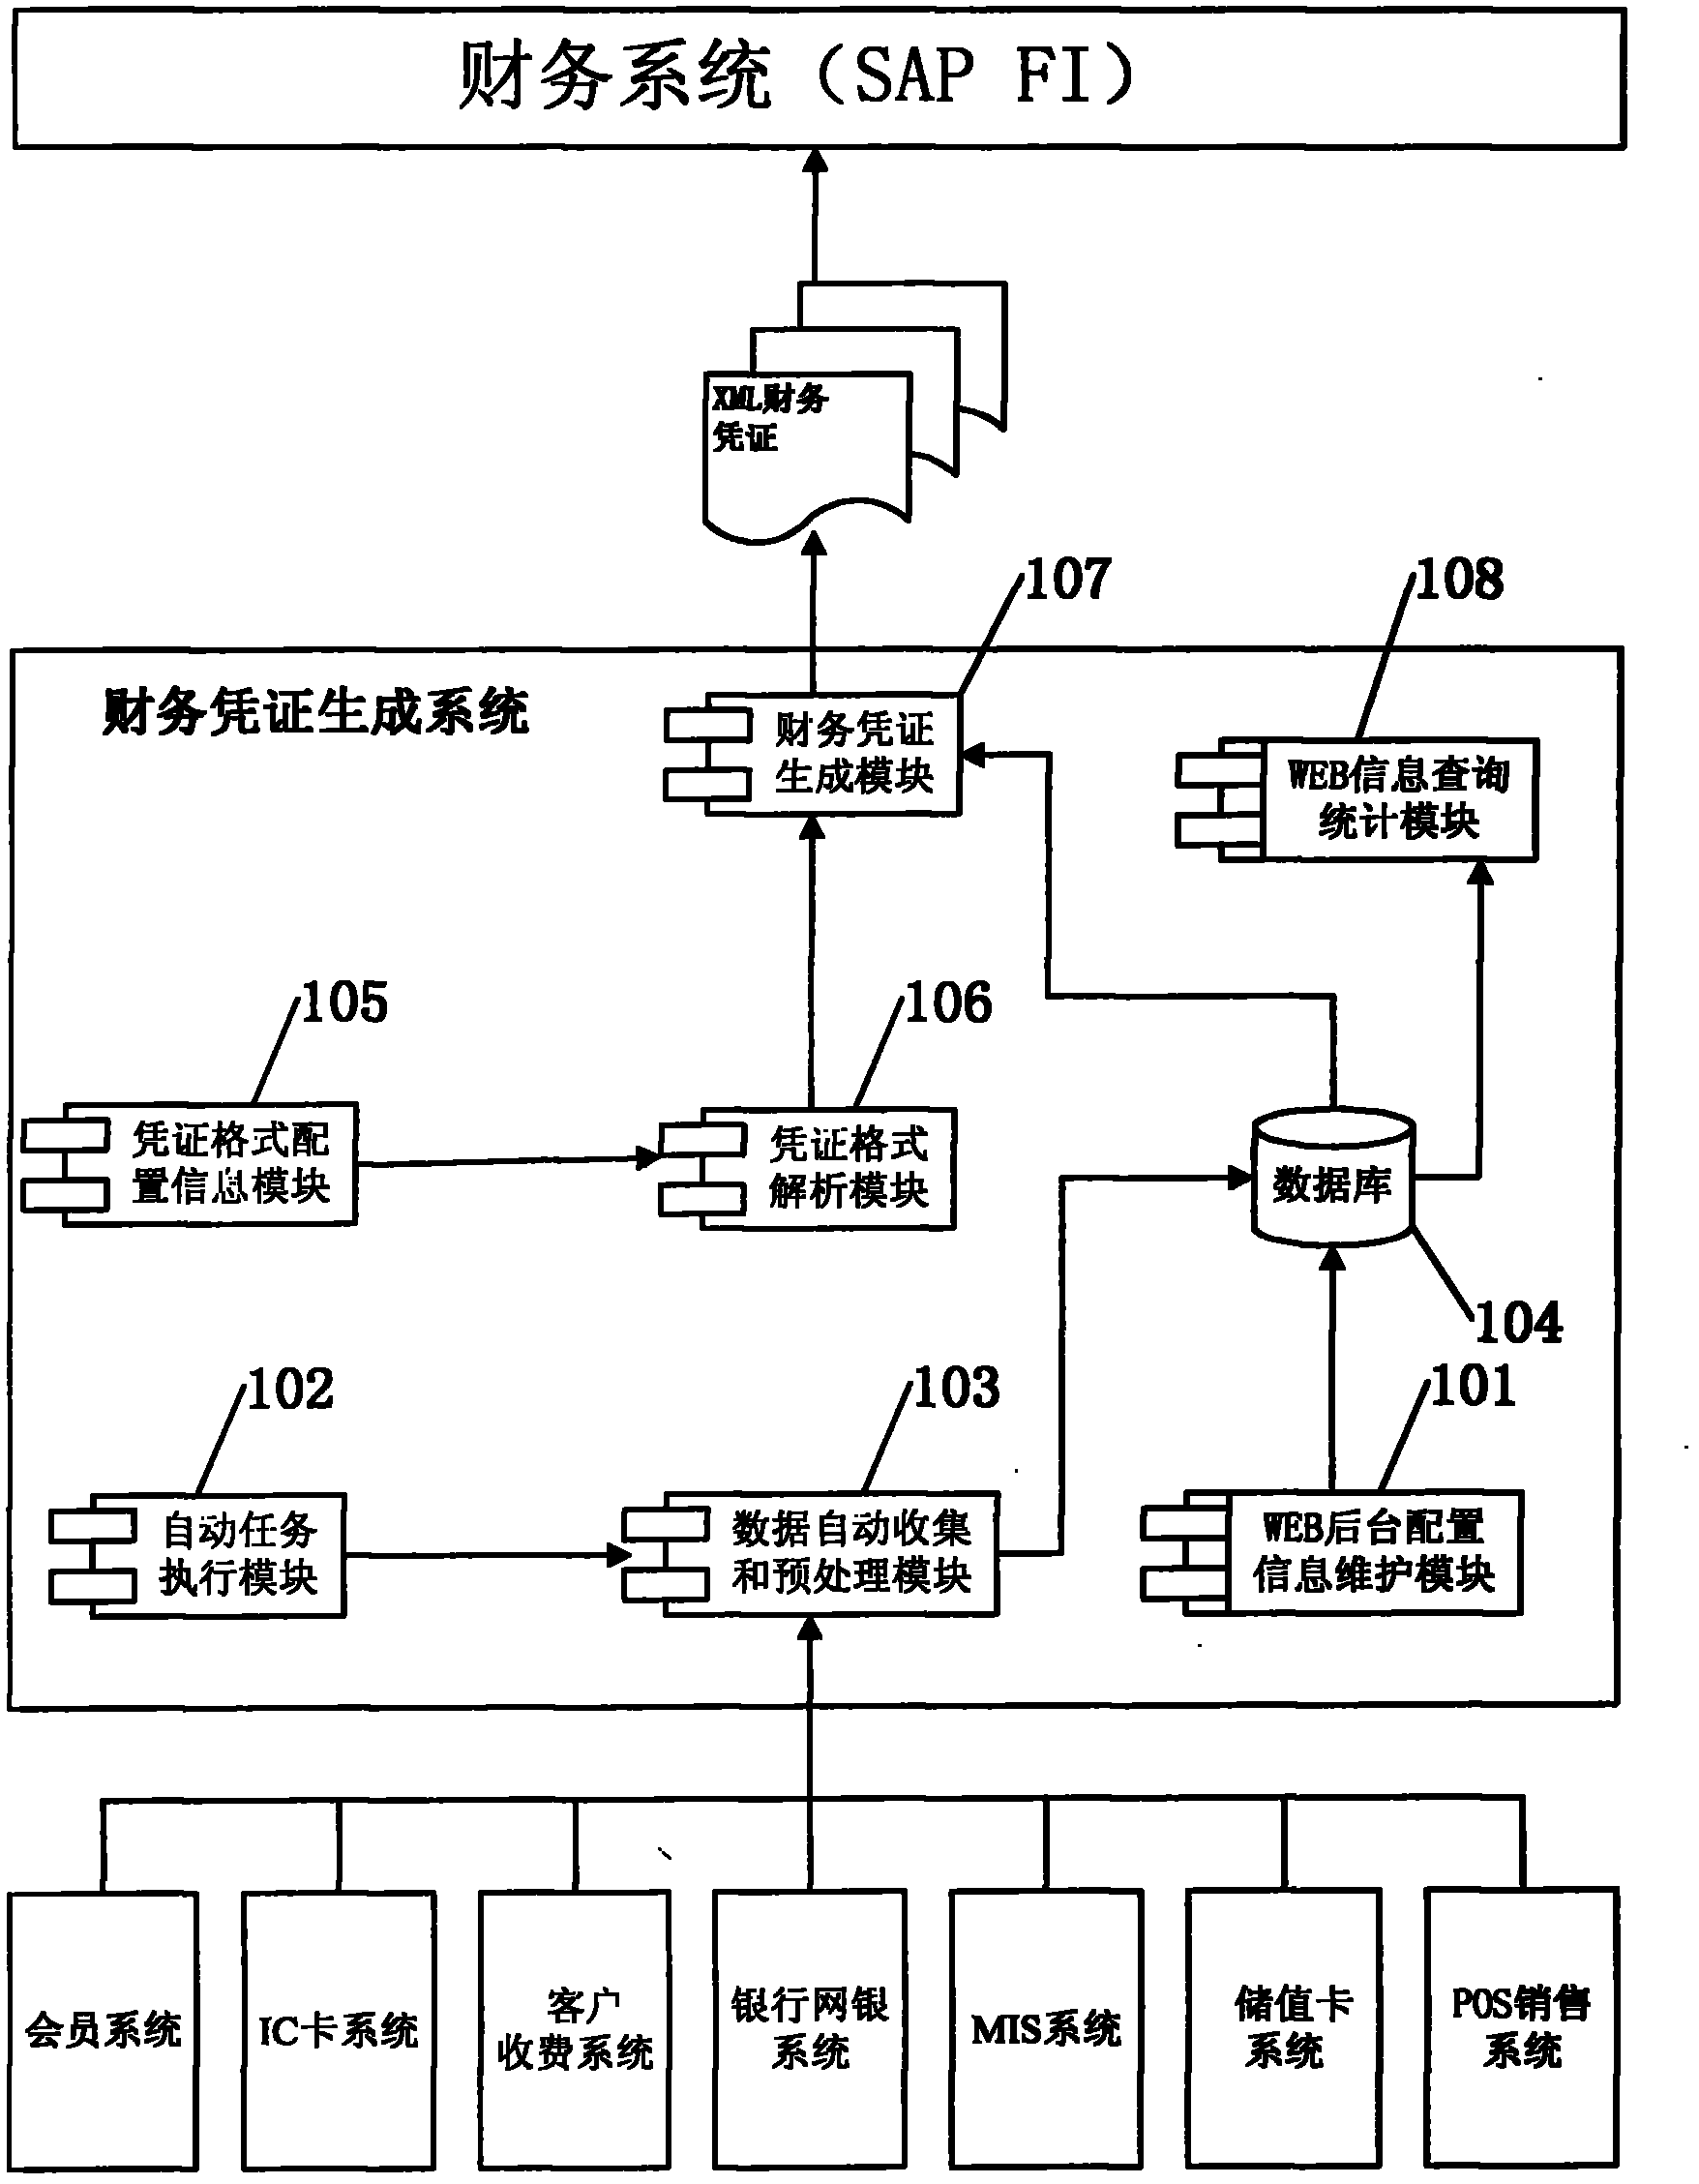 Financial certificate generating system and method